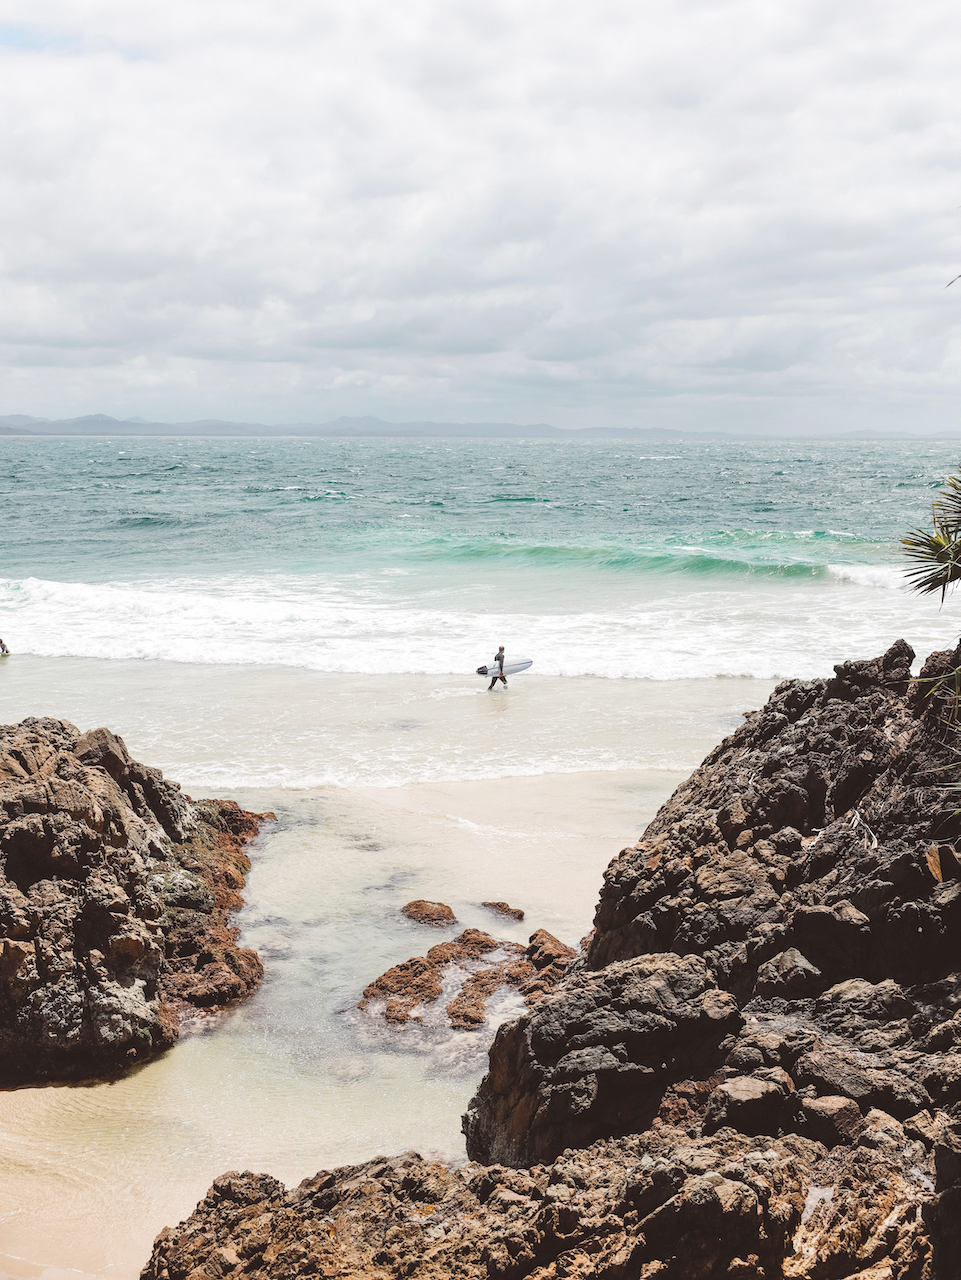 A surfer getting in the water at the Pass - Byron Bay - New South Wales - Australia